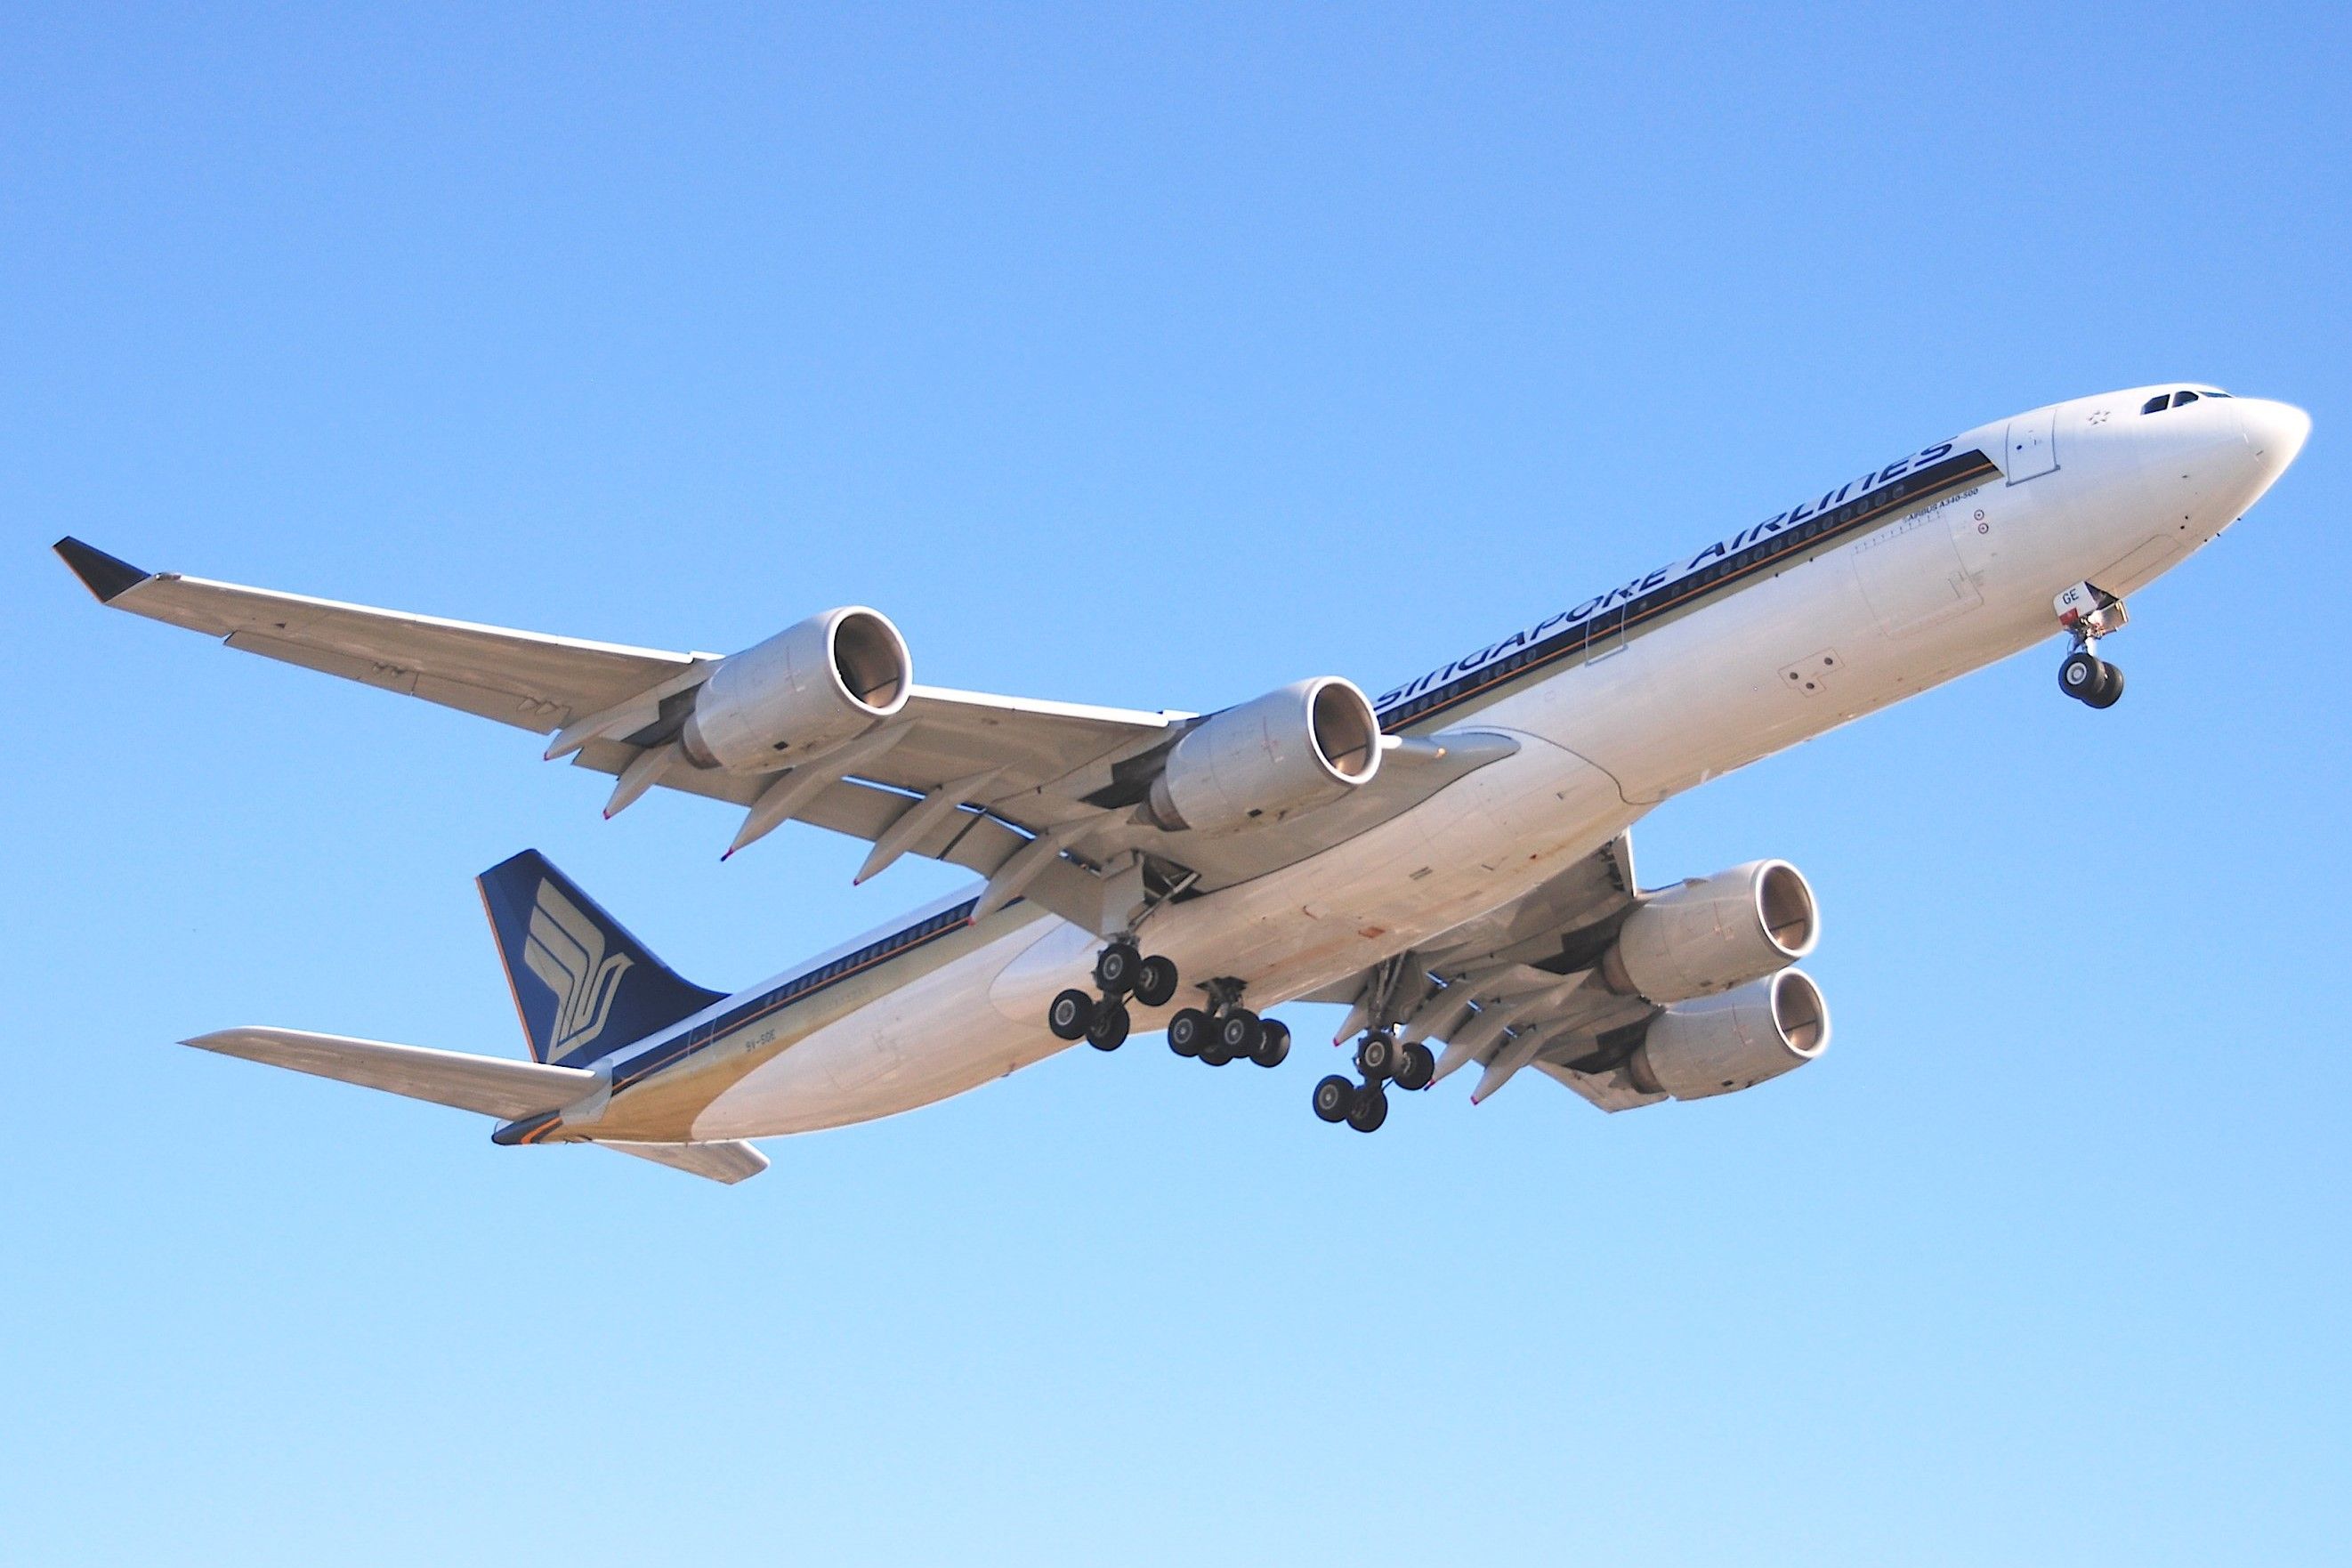 Singapore Airlines A340-500